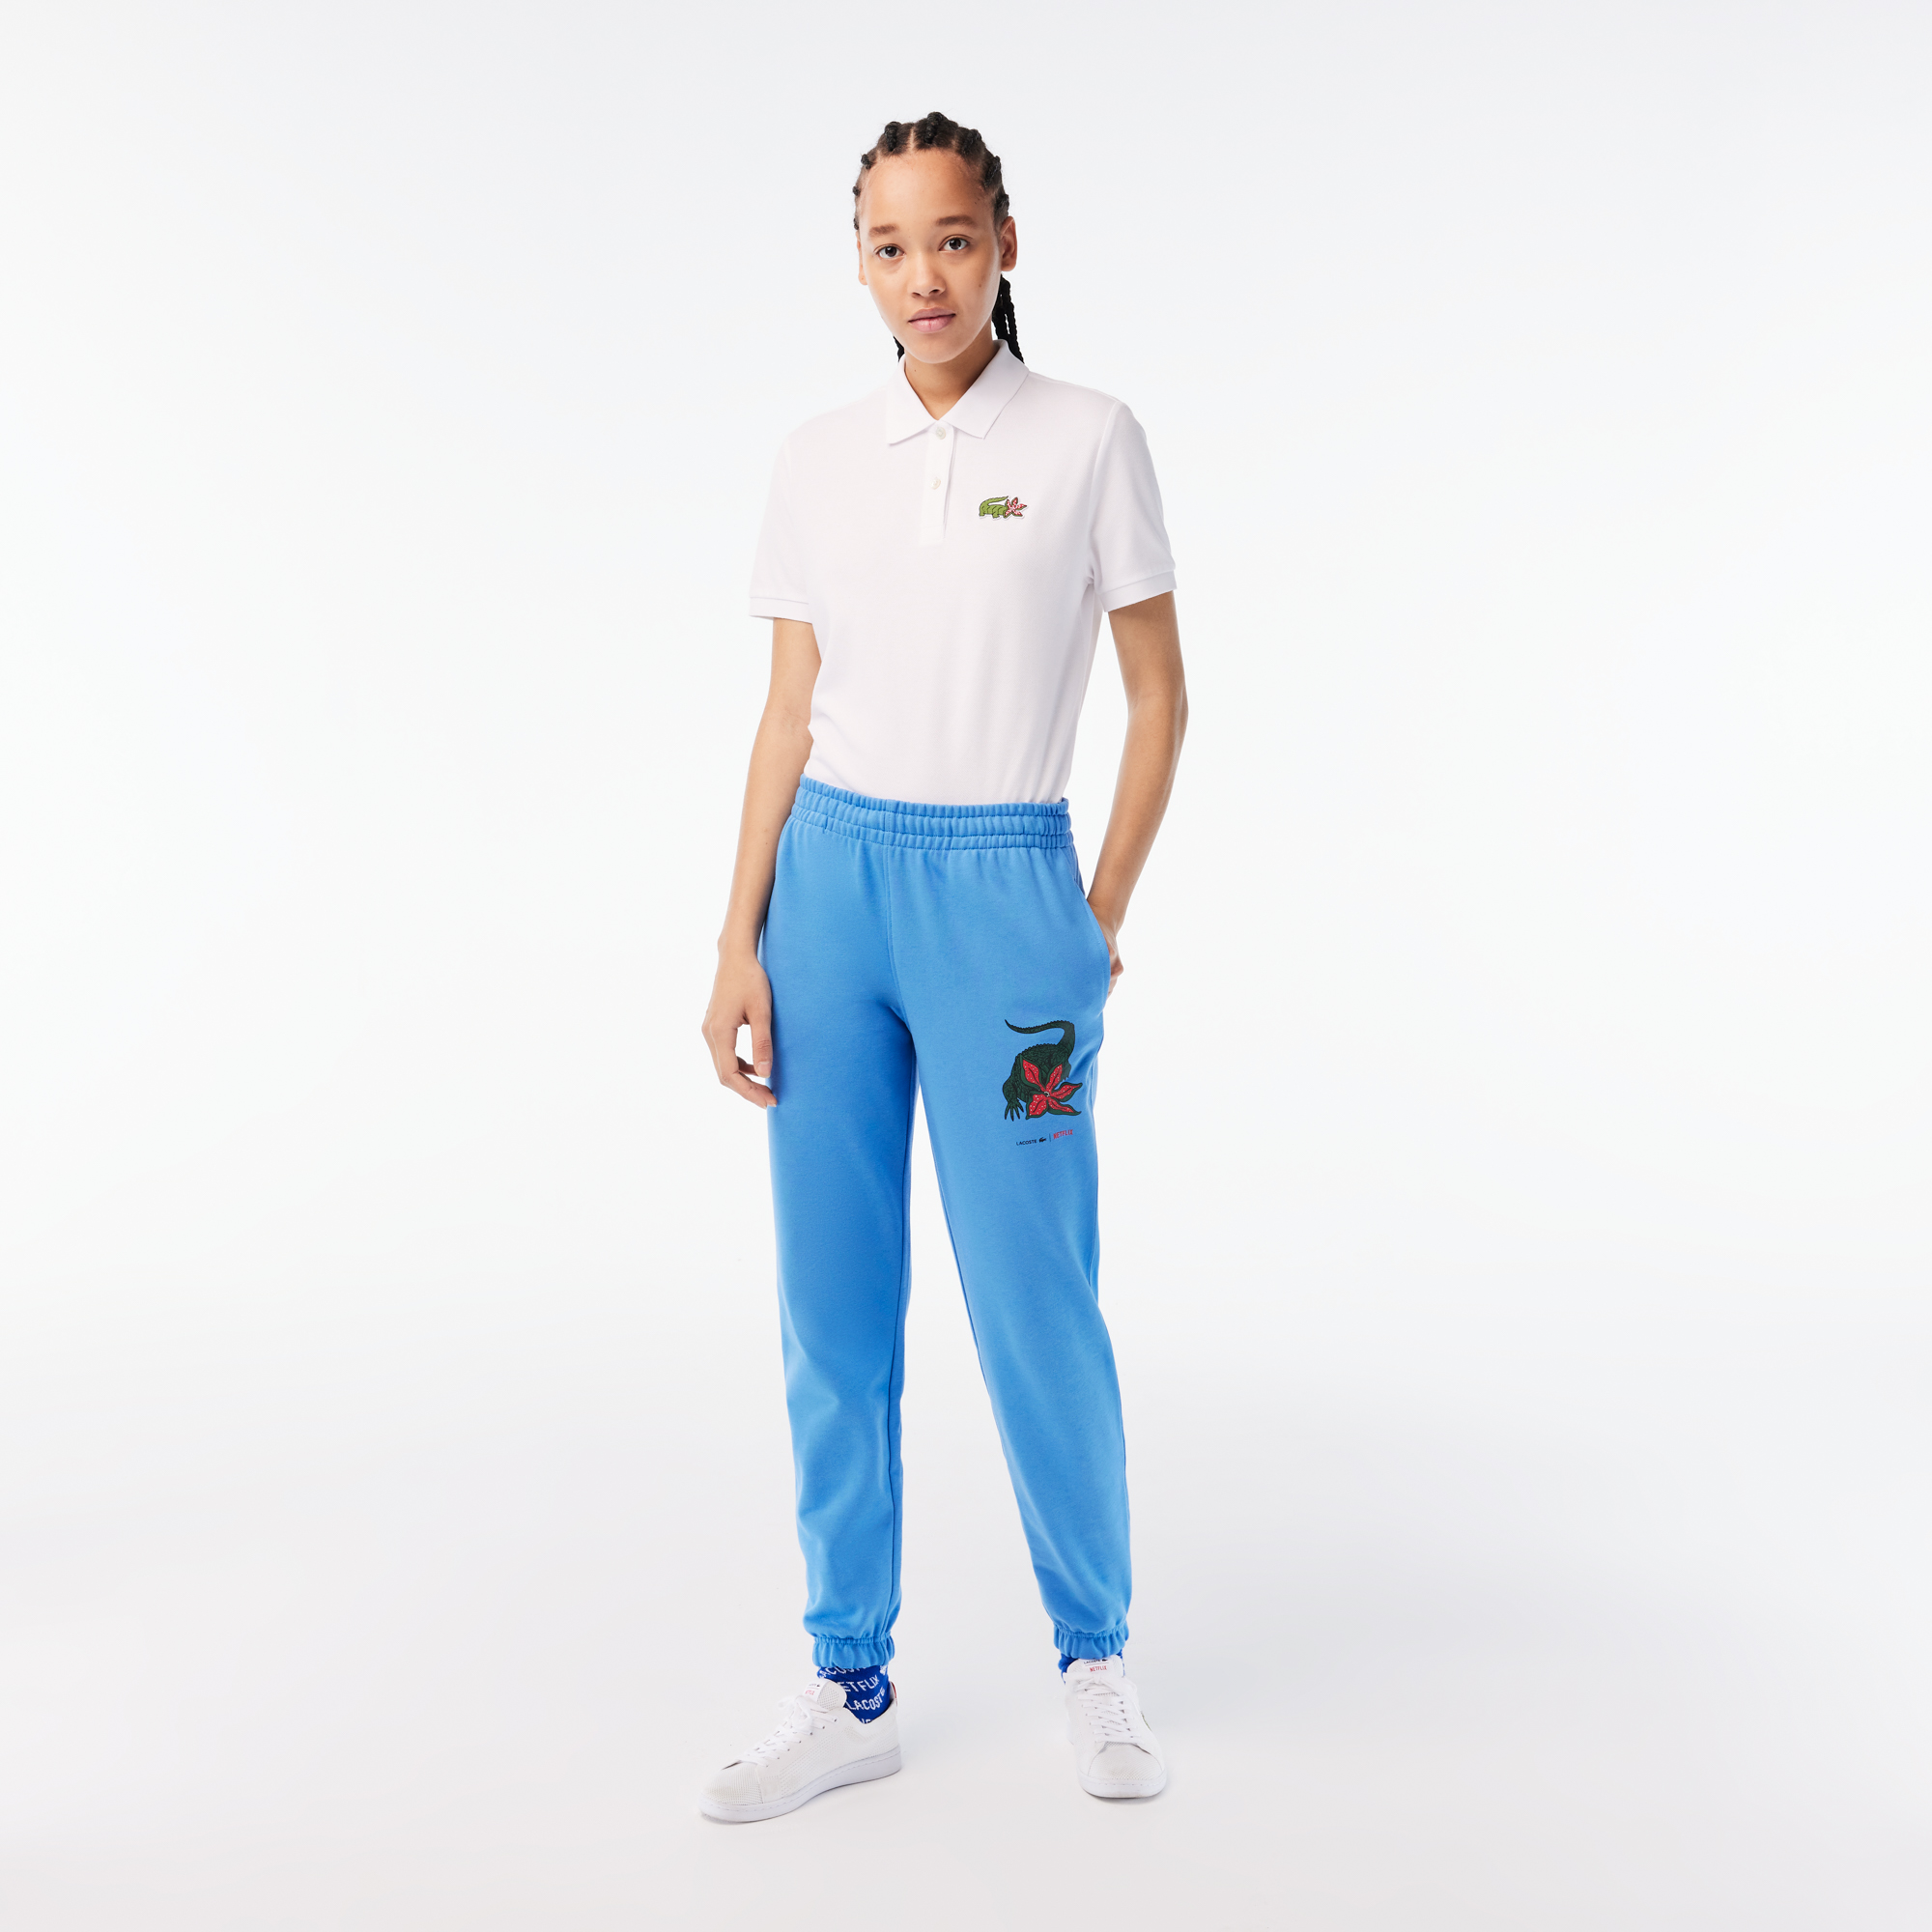 Lacoste Tracksuit Trousers Contrast Stripes navy, red - ESD Store fashion,  footwear and accessories - best brands shoes and designer shoes